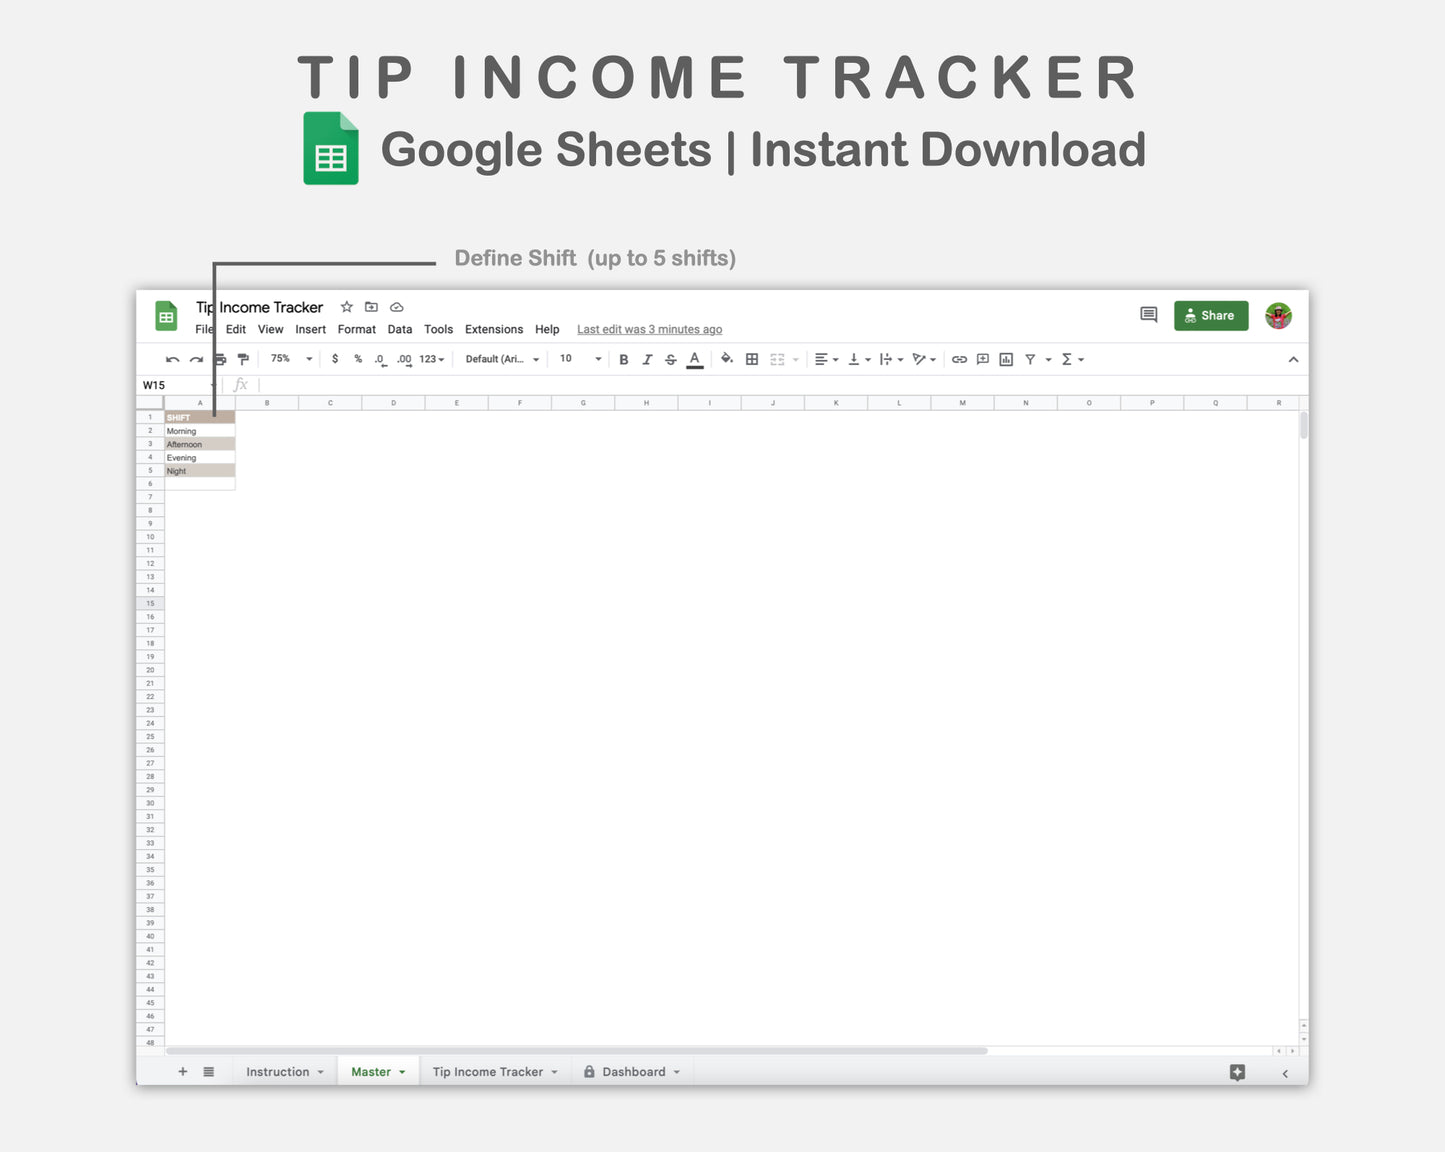 Google Sheets - Tip Income Tracker - Neutral